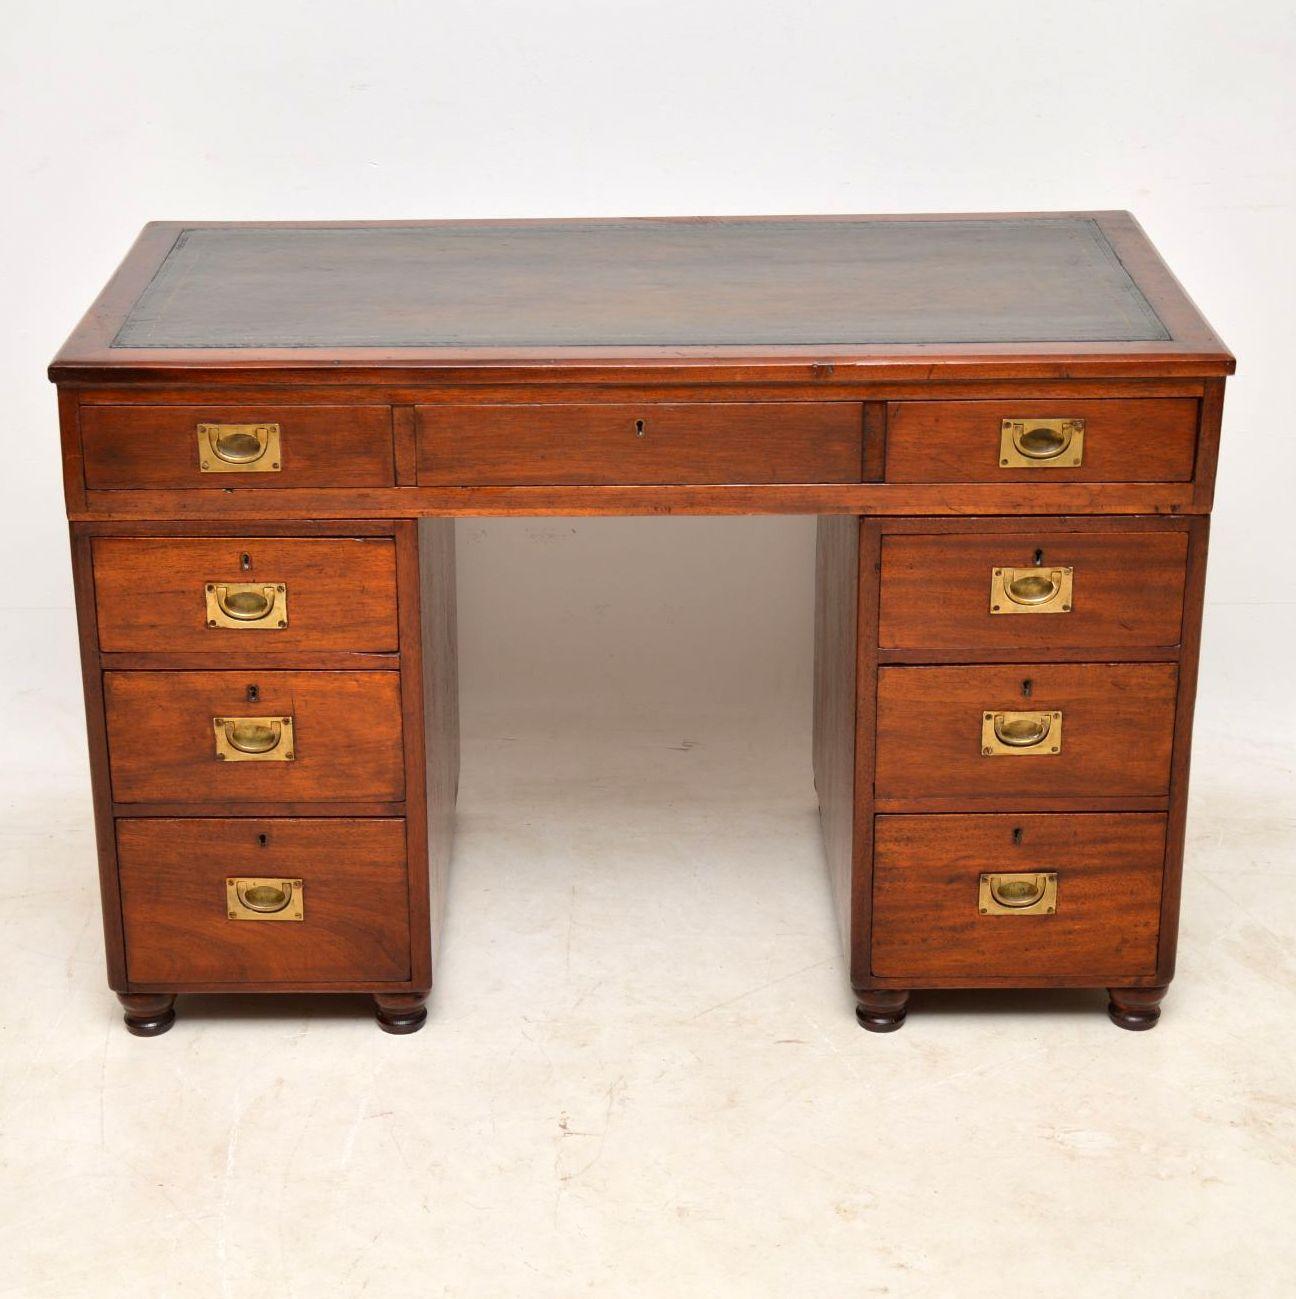 This antique Victorian mahogany desk is campaign style with the military inset brass handles. It's a small proportioned piece with a polished back and comes apart for easy transportation. The mahogany has a lovely rich patina and plenty of